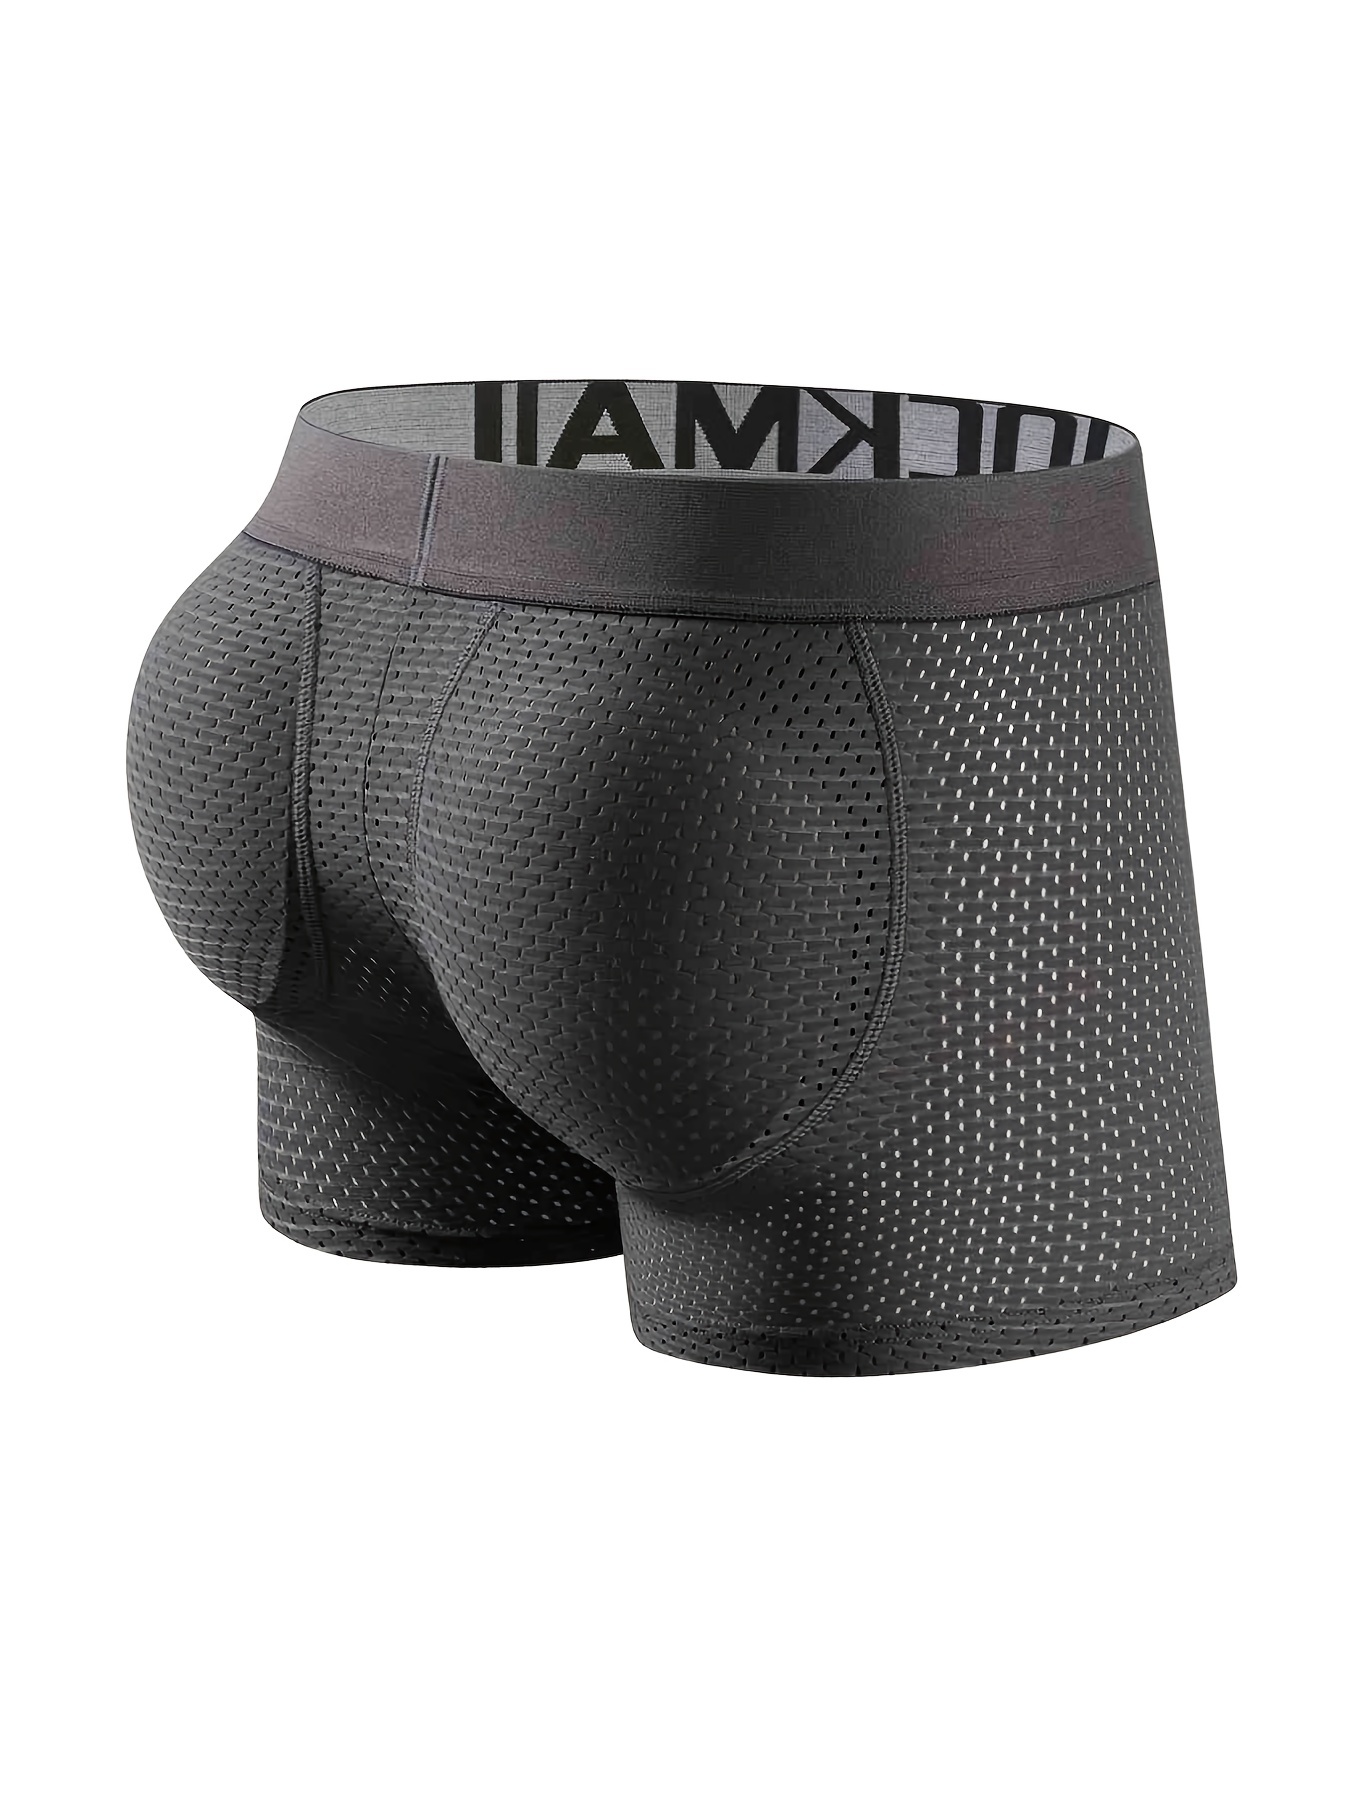 Magic Form Gray Briefs Styles, Prices - Trendyol